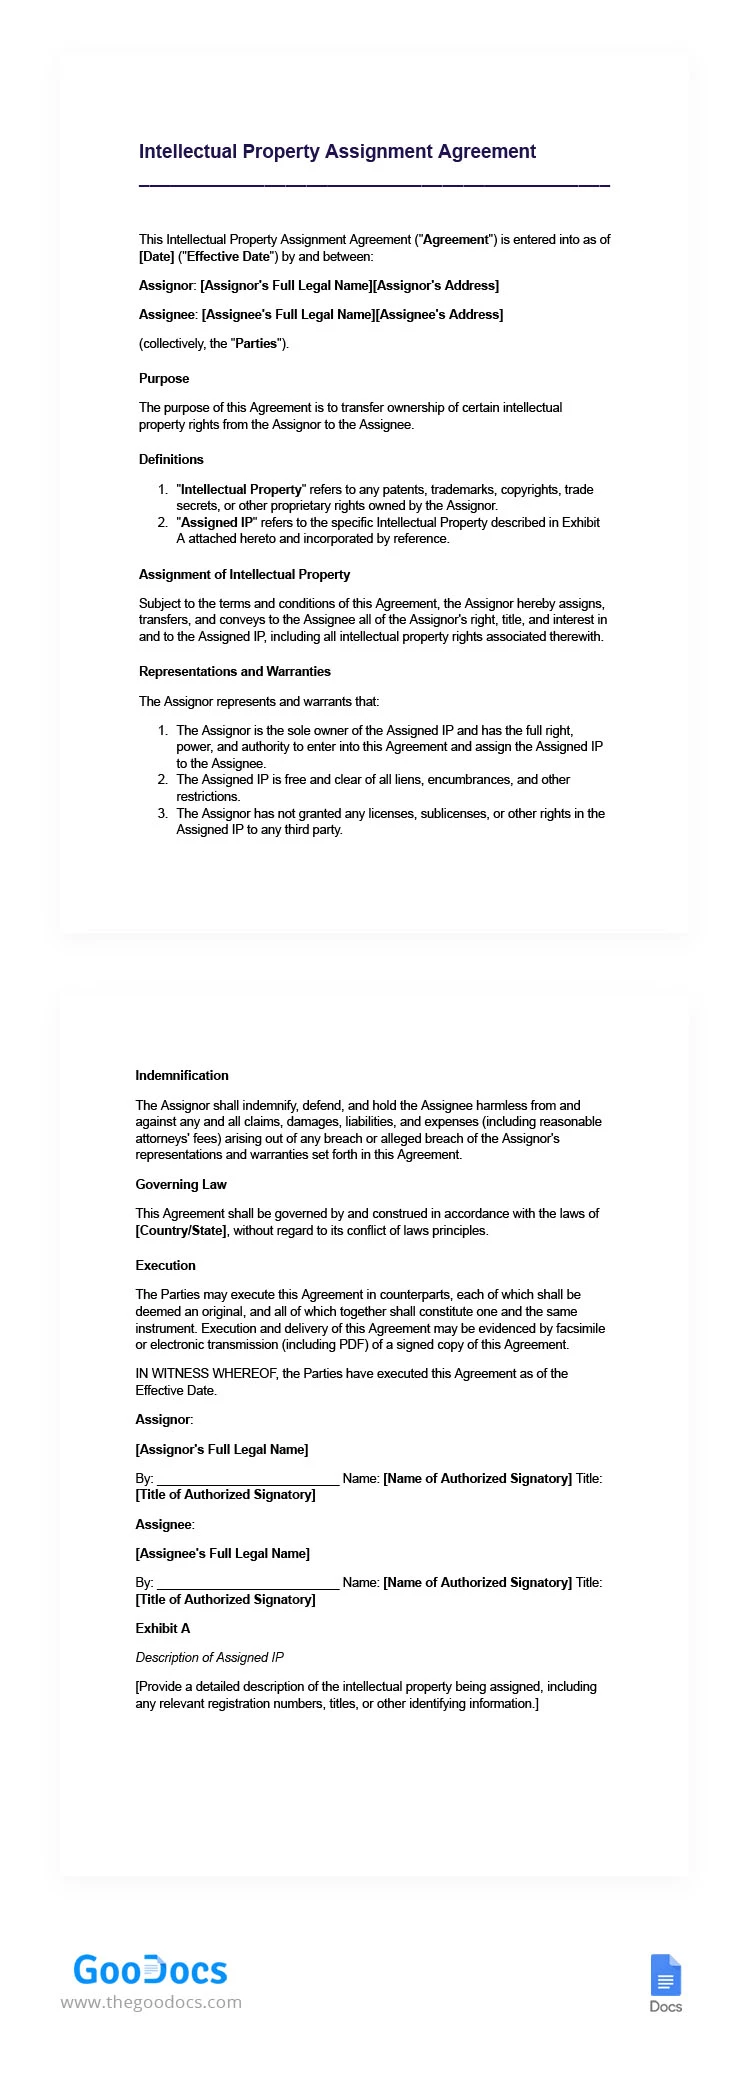 Intellectual Property Assignment Agreement - free Google Docs Template - 10066796